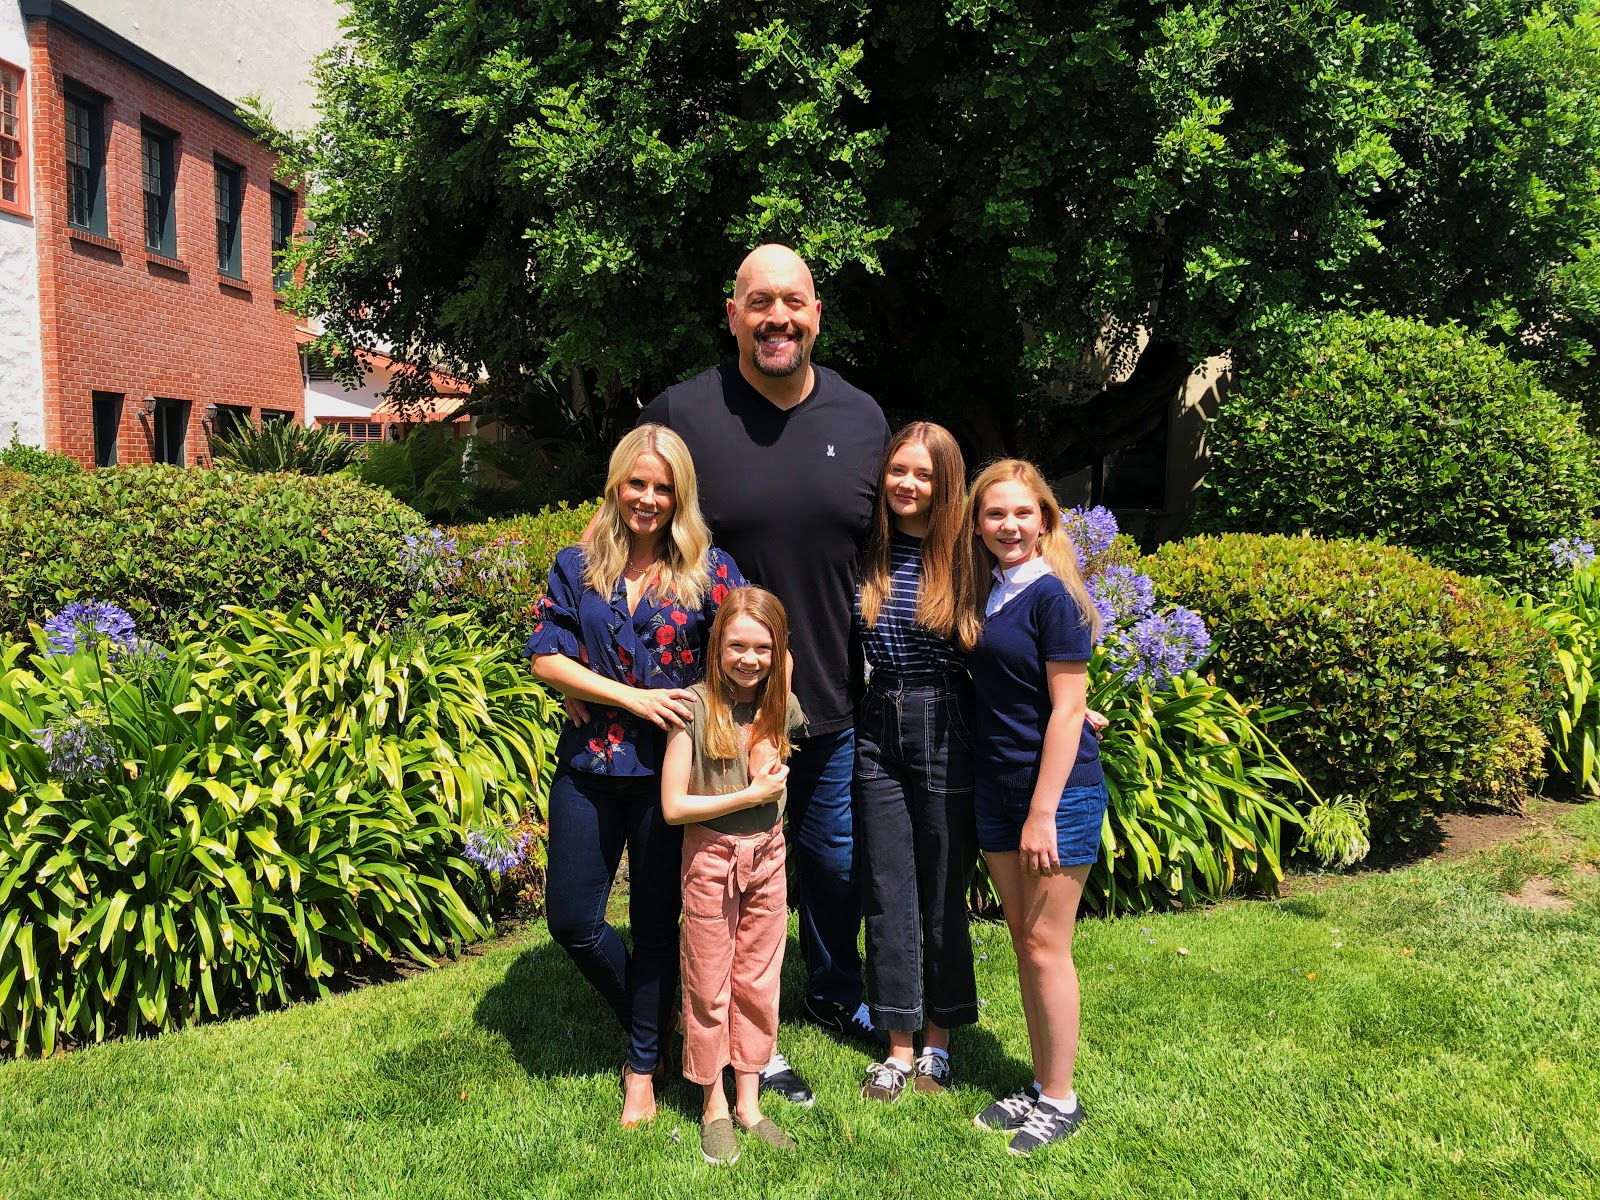 Big Show With His Netflix Family